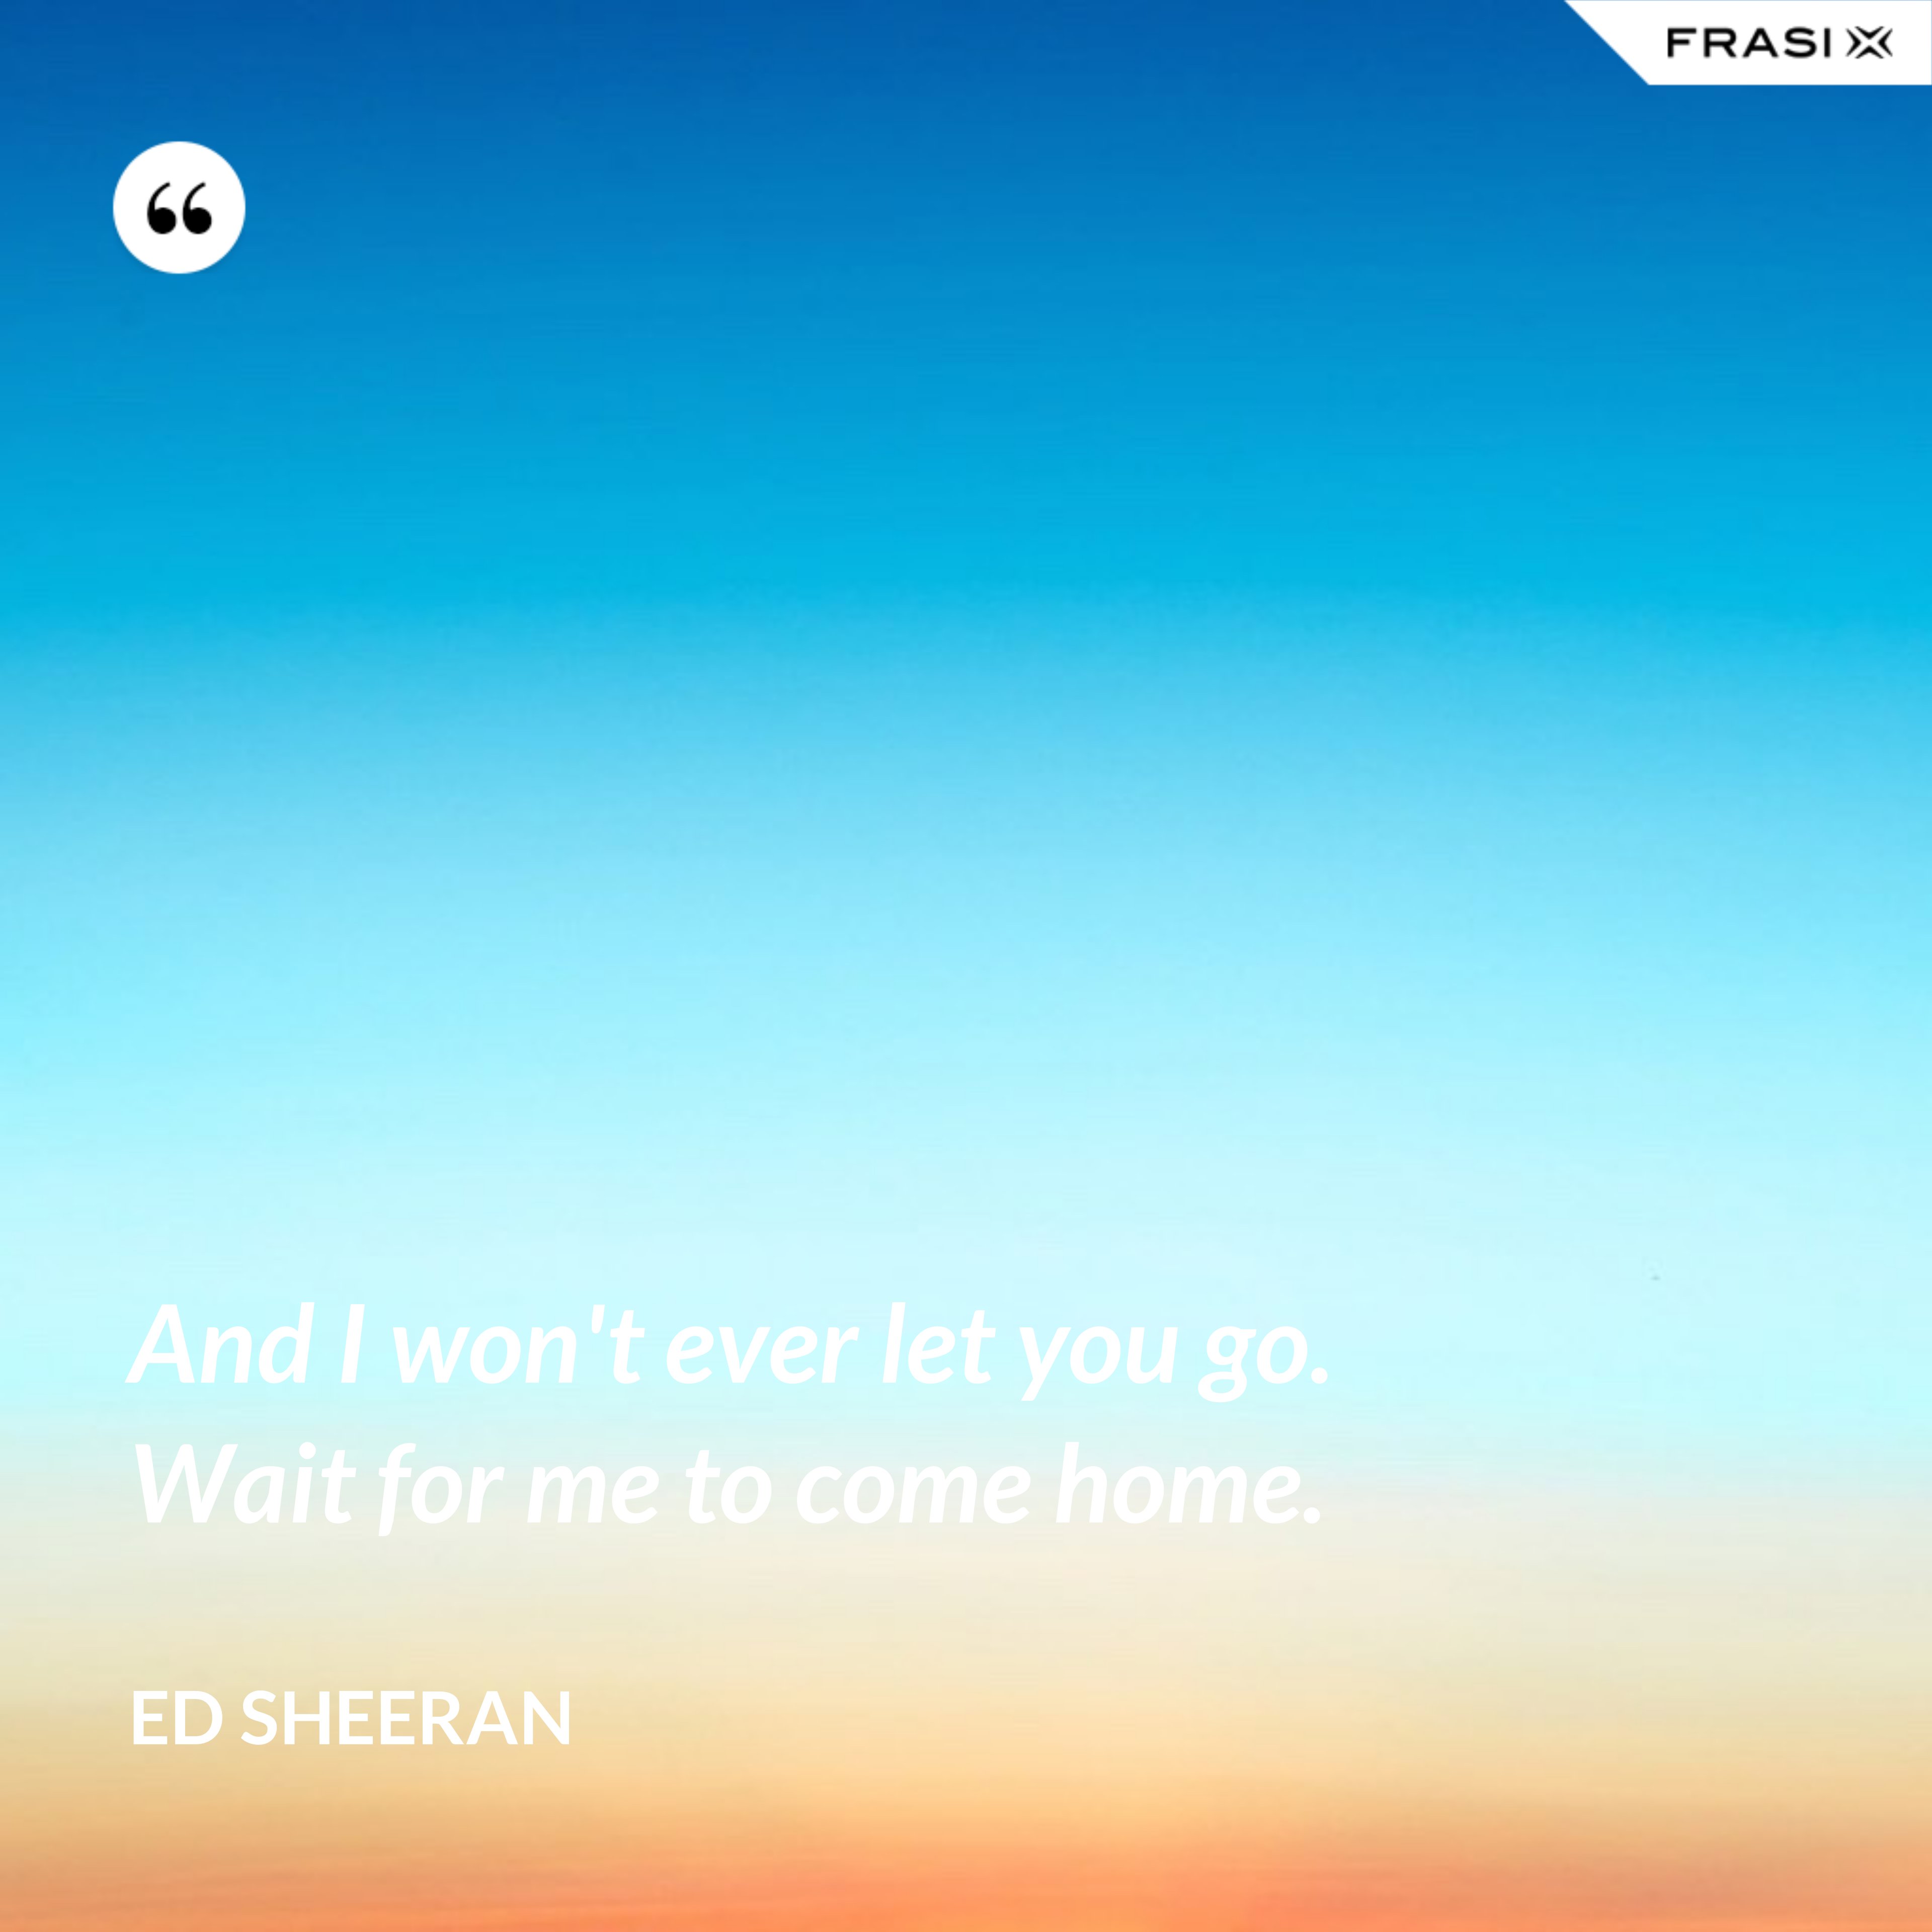 And I won't ever let you go. Wait for me to come home. - Ed Sheeran